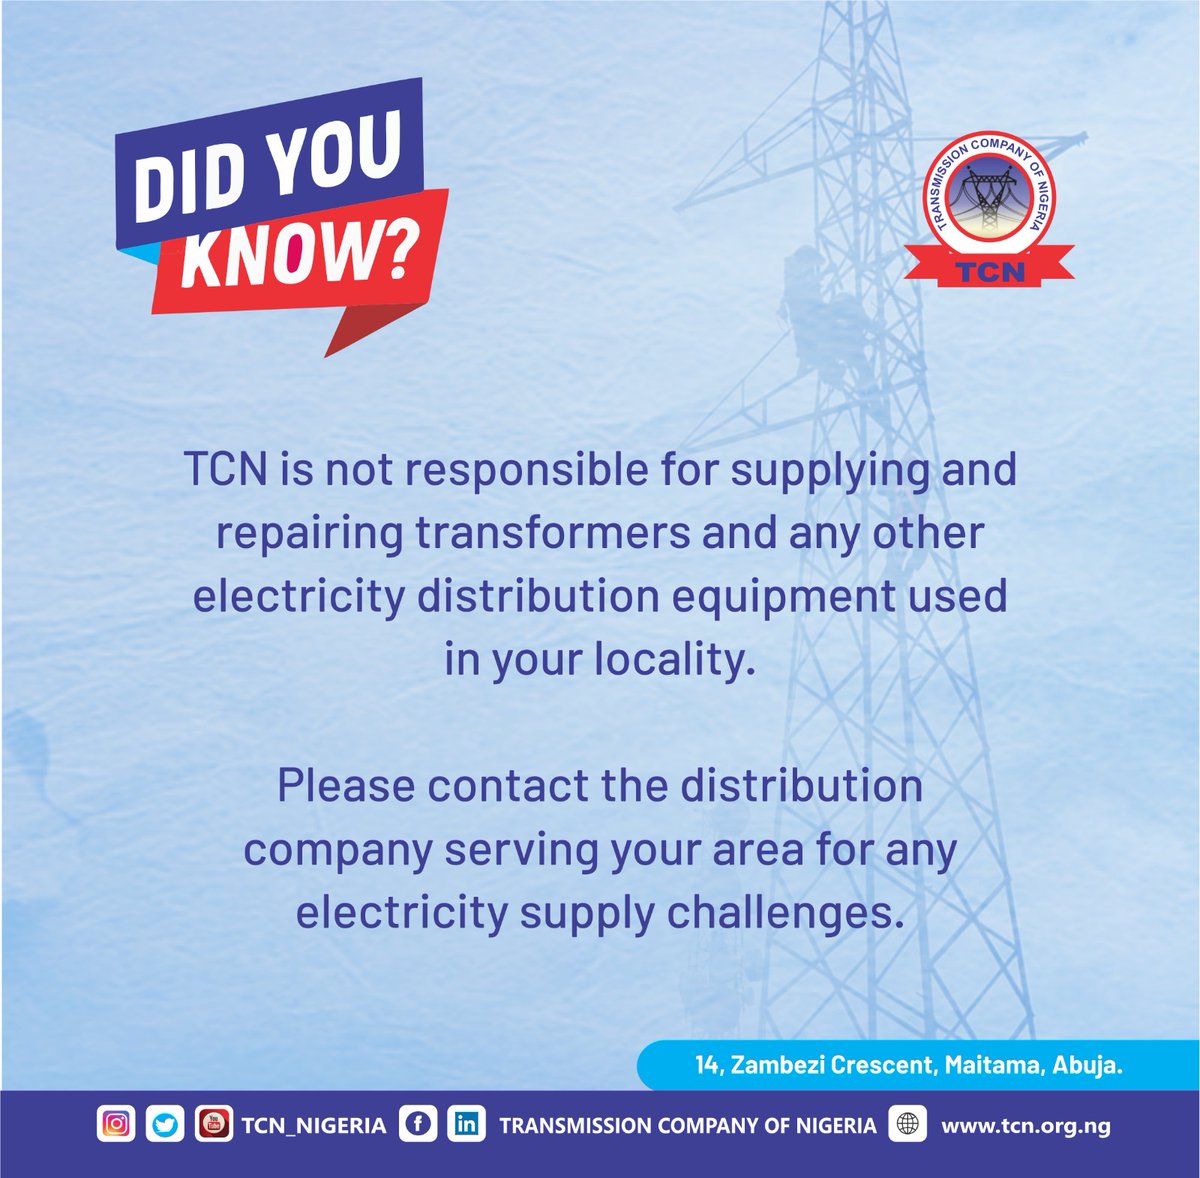 TCN does not interface directly with electricity consumers and, hence, is not responsible for electricity equipment used in your locality.

#tcnnigeria
#TCNCares
#electricity
#power